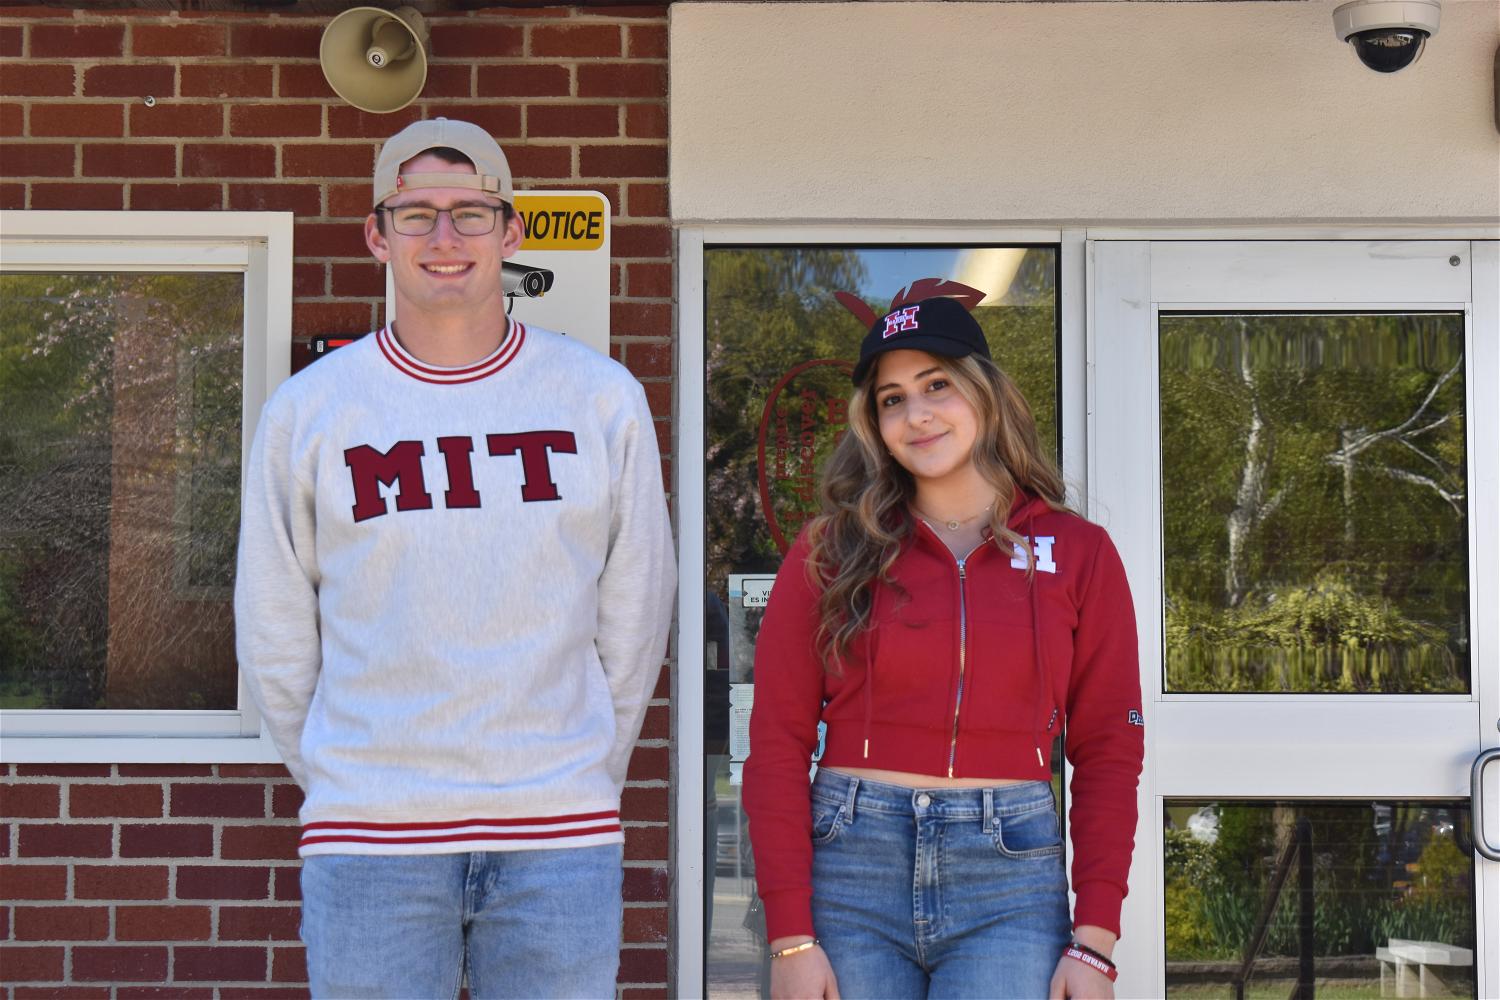 Senior and valedictorian John Dwyer (left) and salutatorian Dessa Kavrakis (right) will address their peers at the Class of 2023 commencement ceremony next month. Photo courtesy of the NENUFSD.